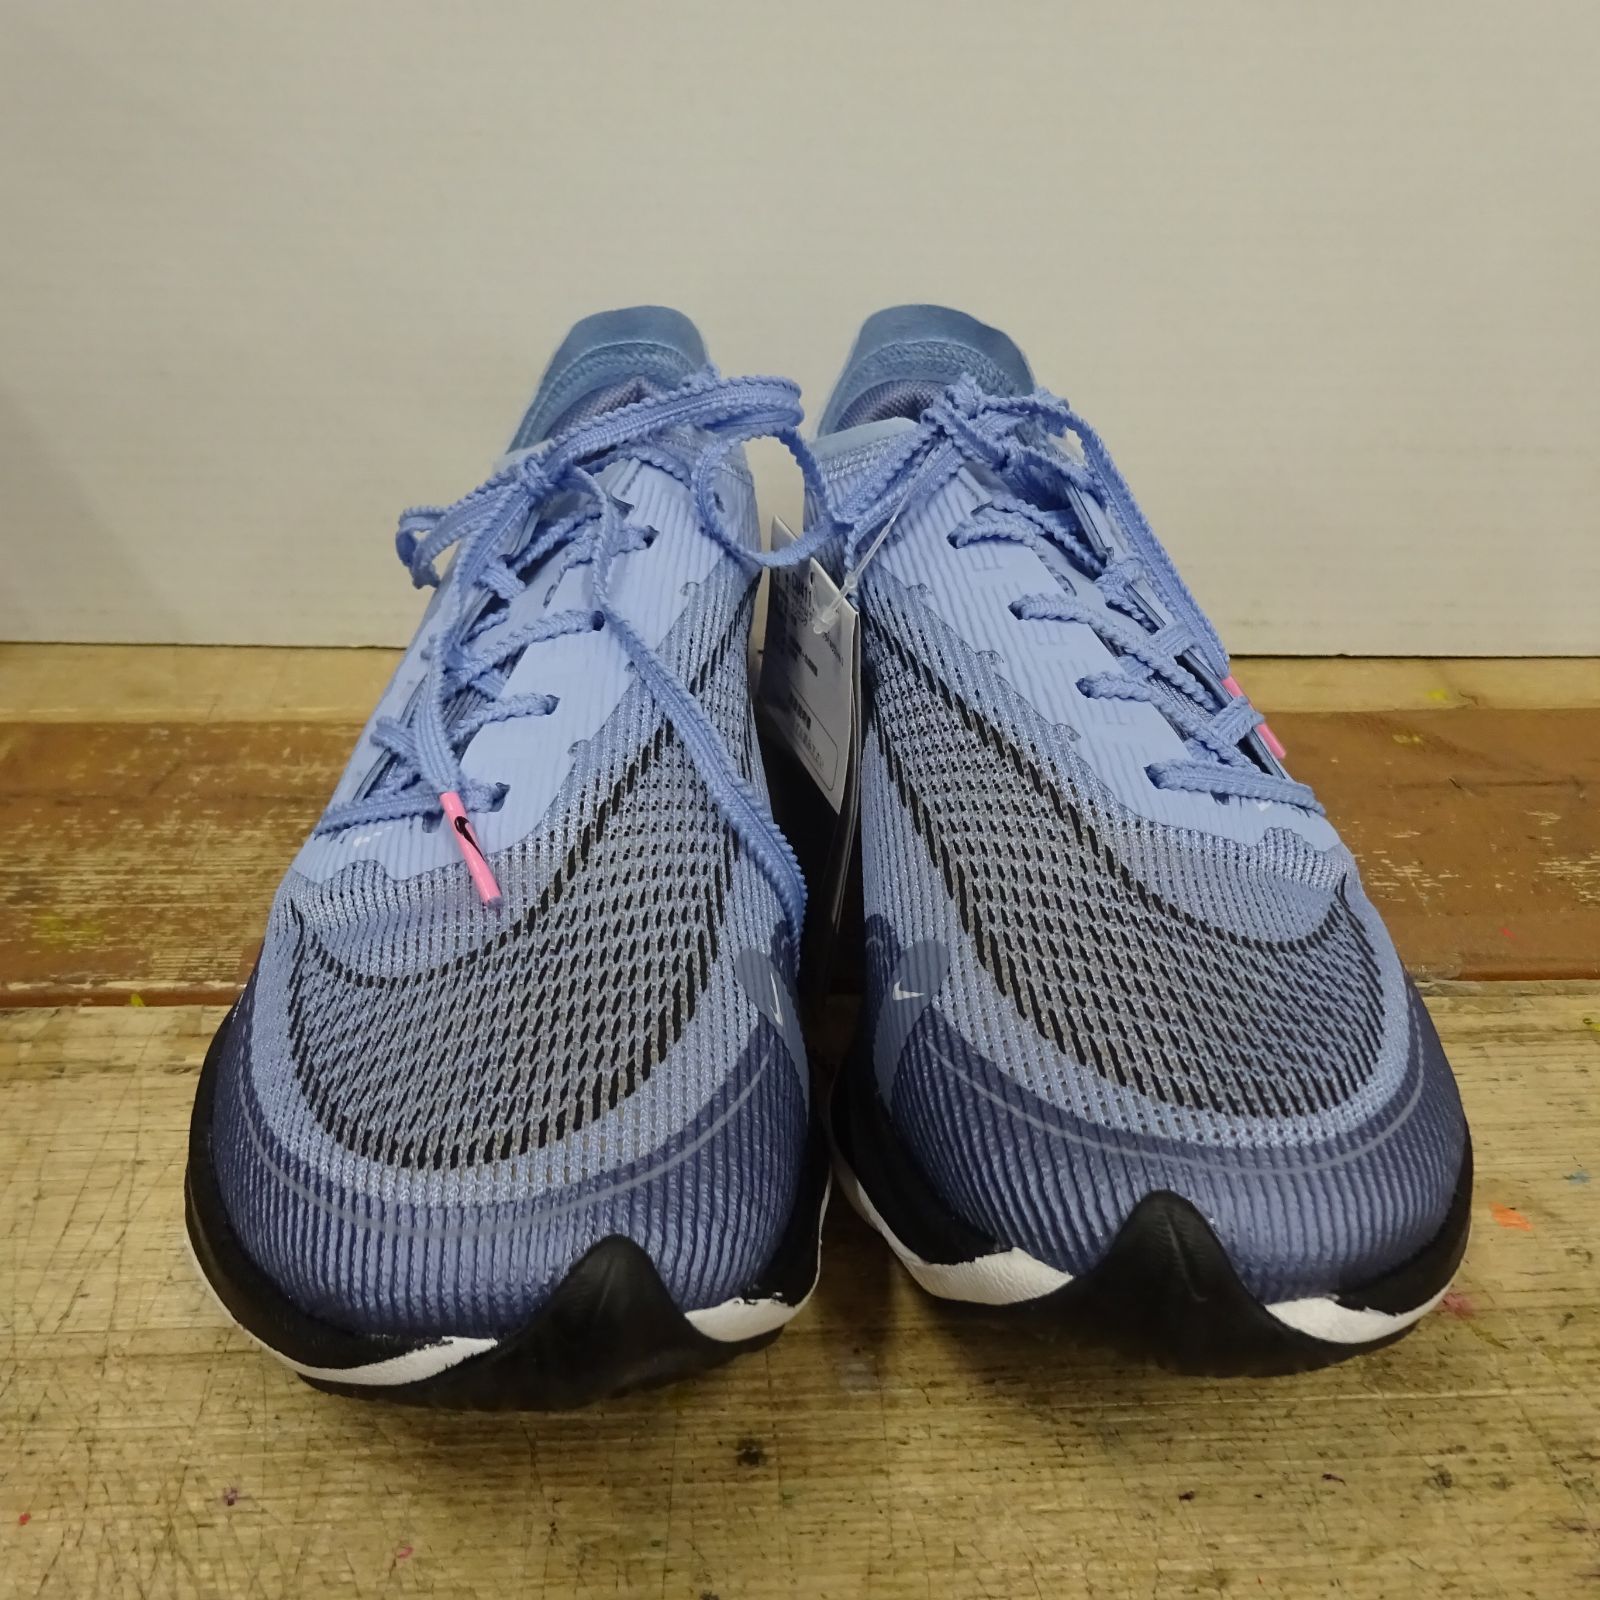 Nike ZoomX Vaporfly Next% 2 ナイキ ズームX ヴェイパーフライ ...